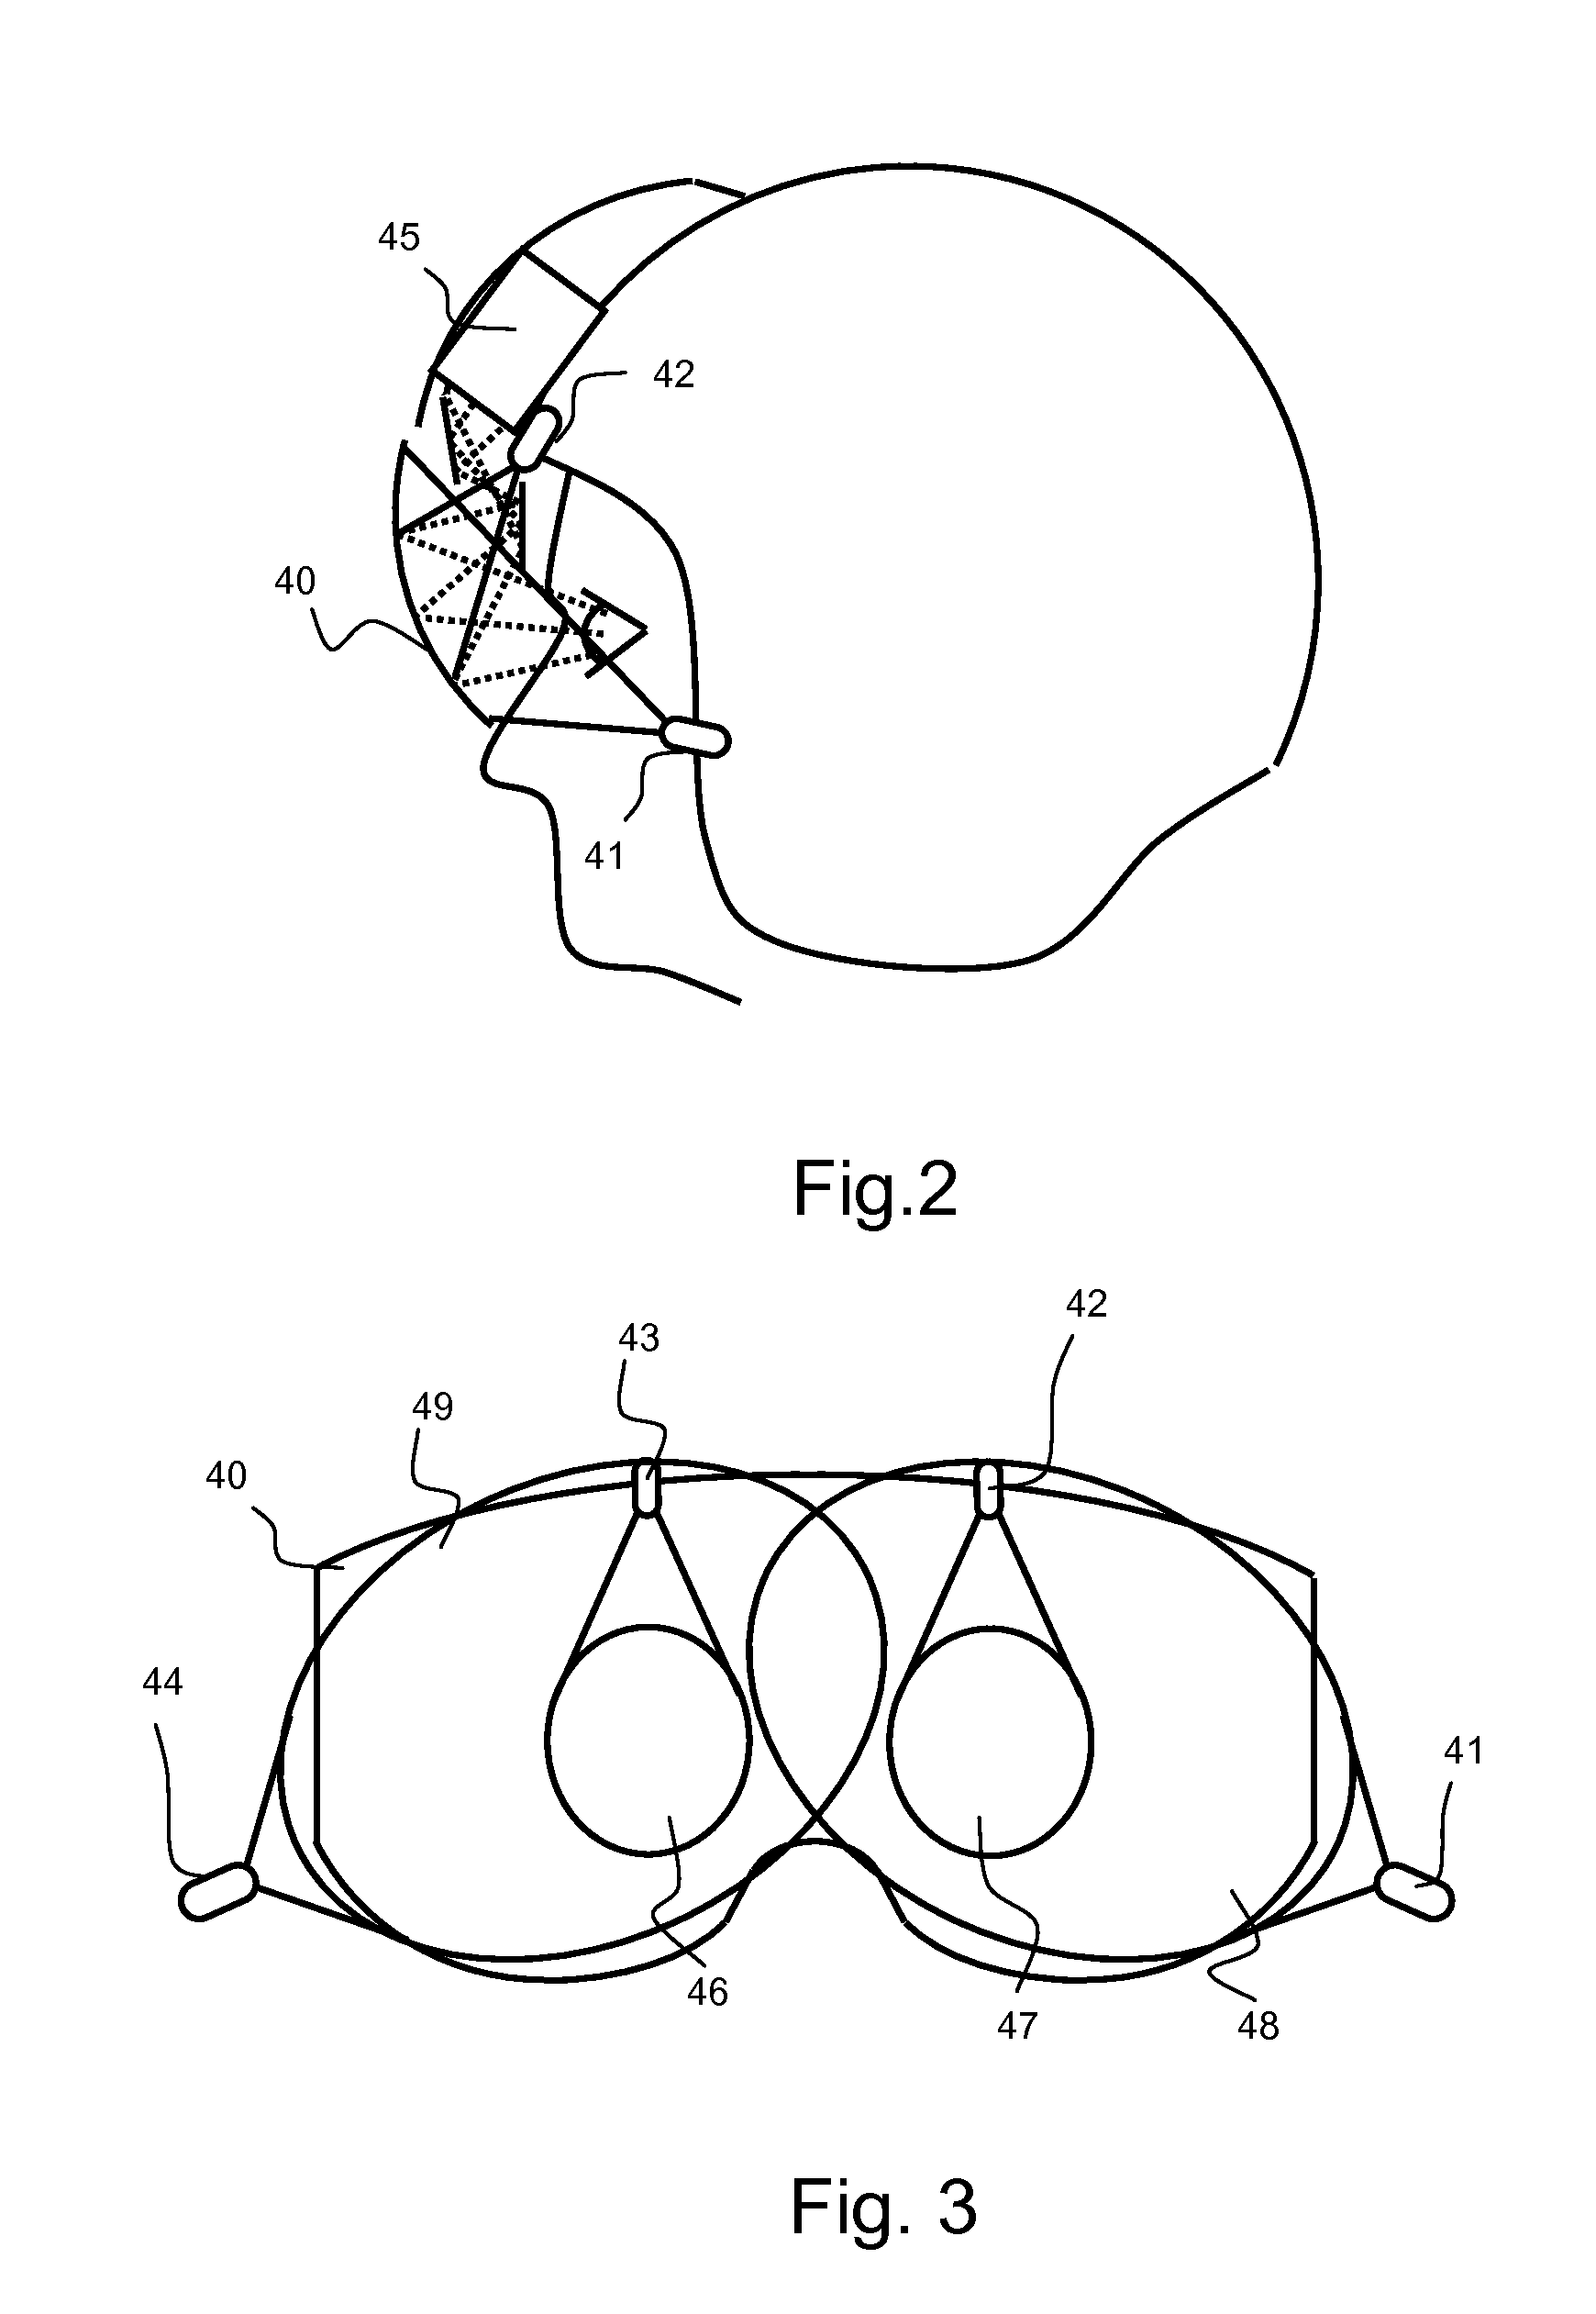 Vision Equipment Comprising an Optical Strip with a Controlled Coefficient of Light Transmission